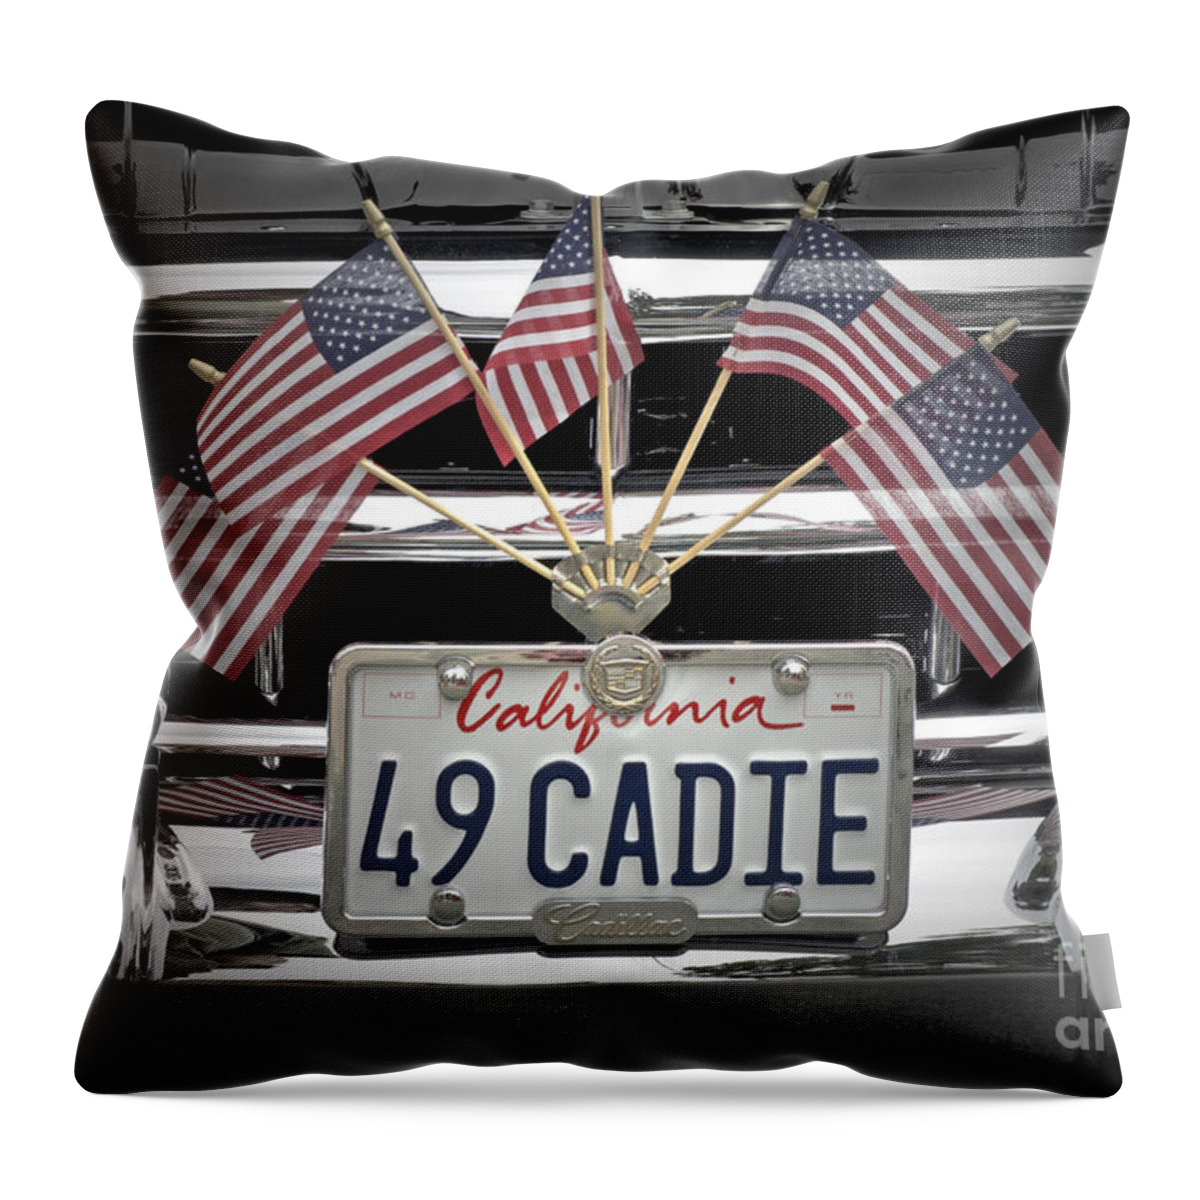 Cadillac Throw Pillow featuring the photograph 49 Caddy by Gwyn Newcombe